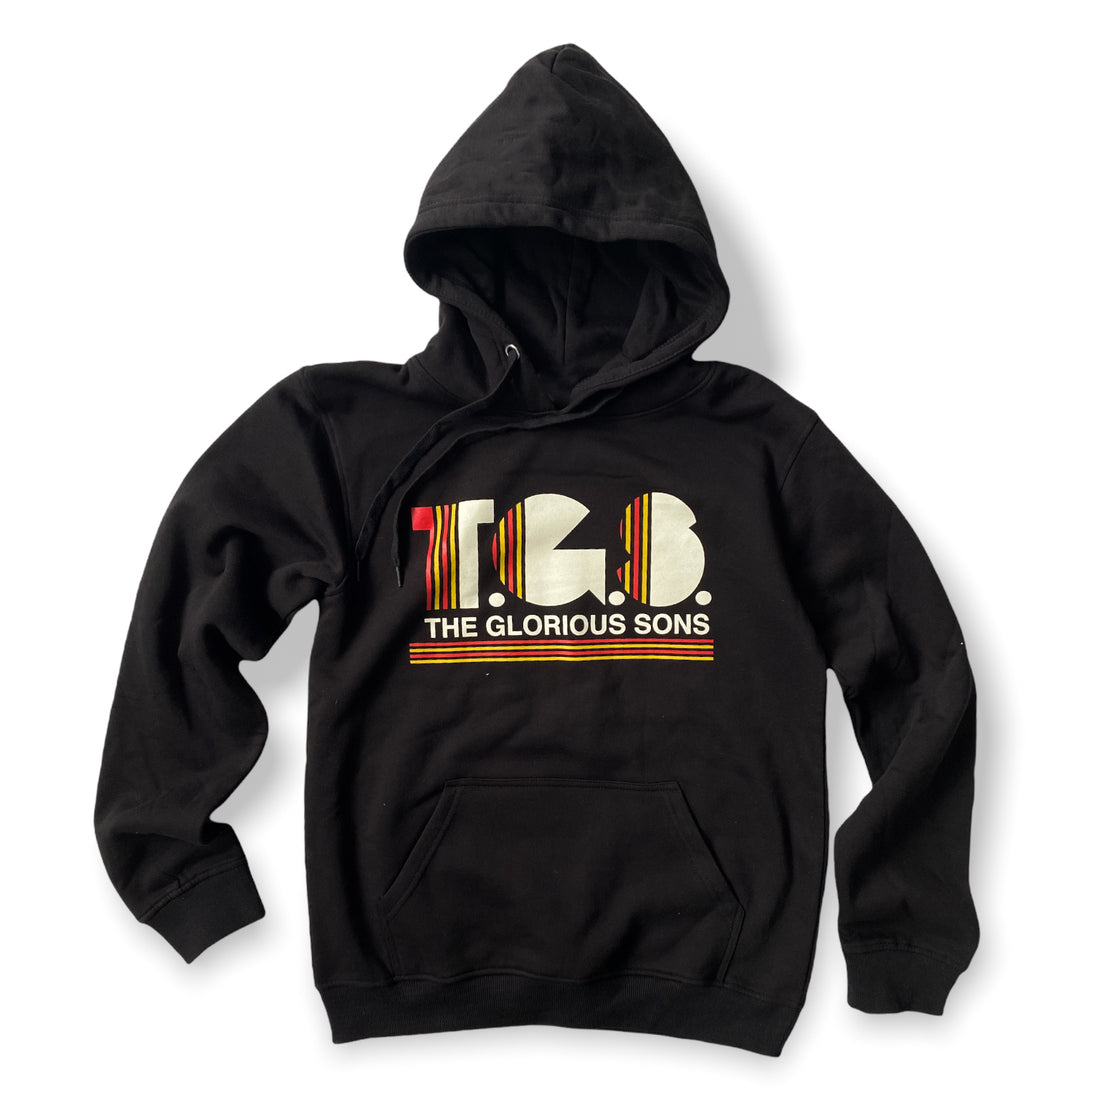 The Glorious Sons - BBC - Pullover Hoodie